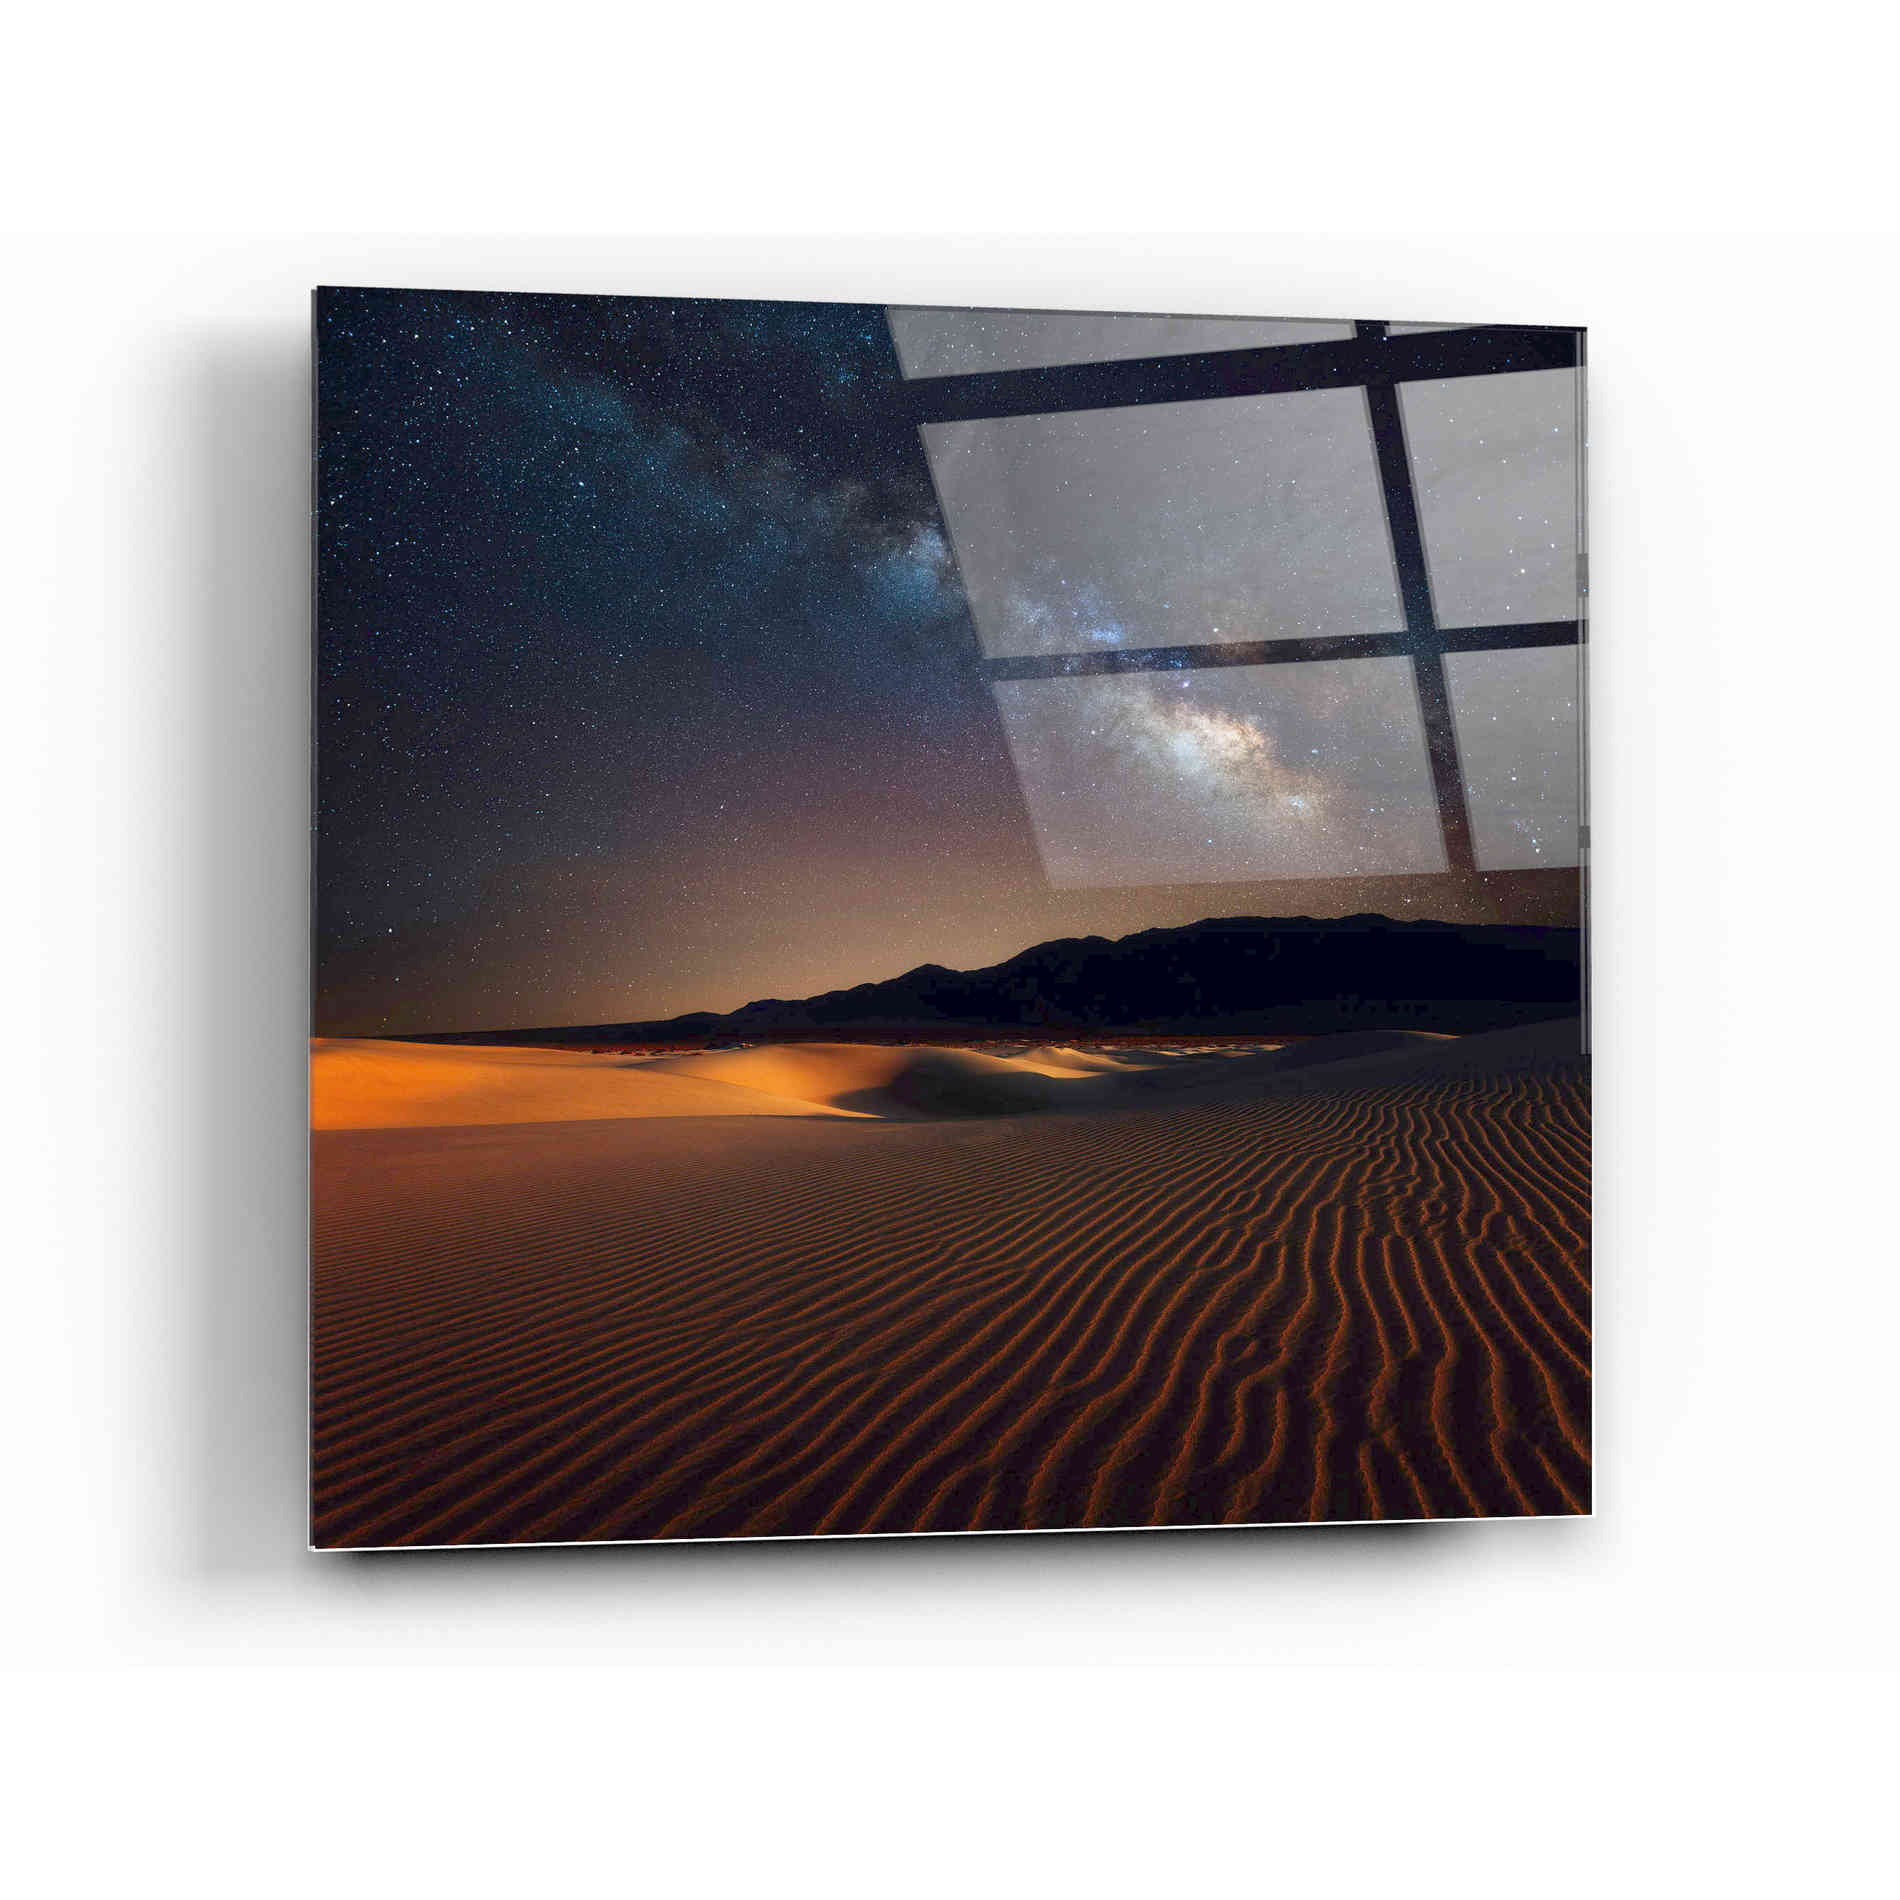 Epic Art "Milky Way Over Mesquite Dunes" by Darren White, Acrylic Glass Wall Art,12x12